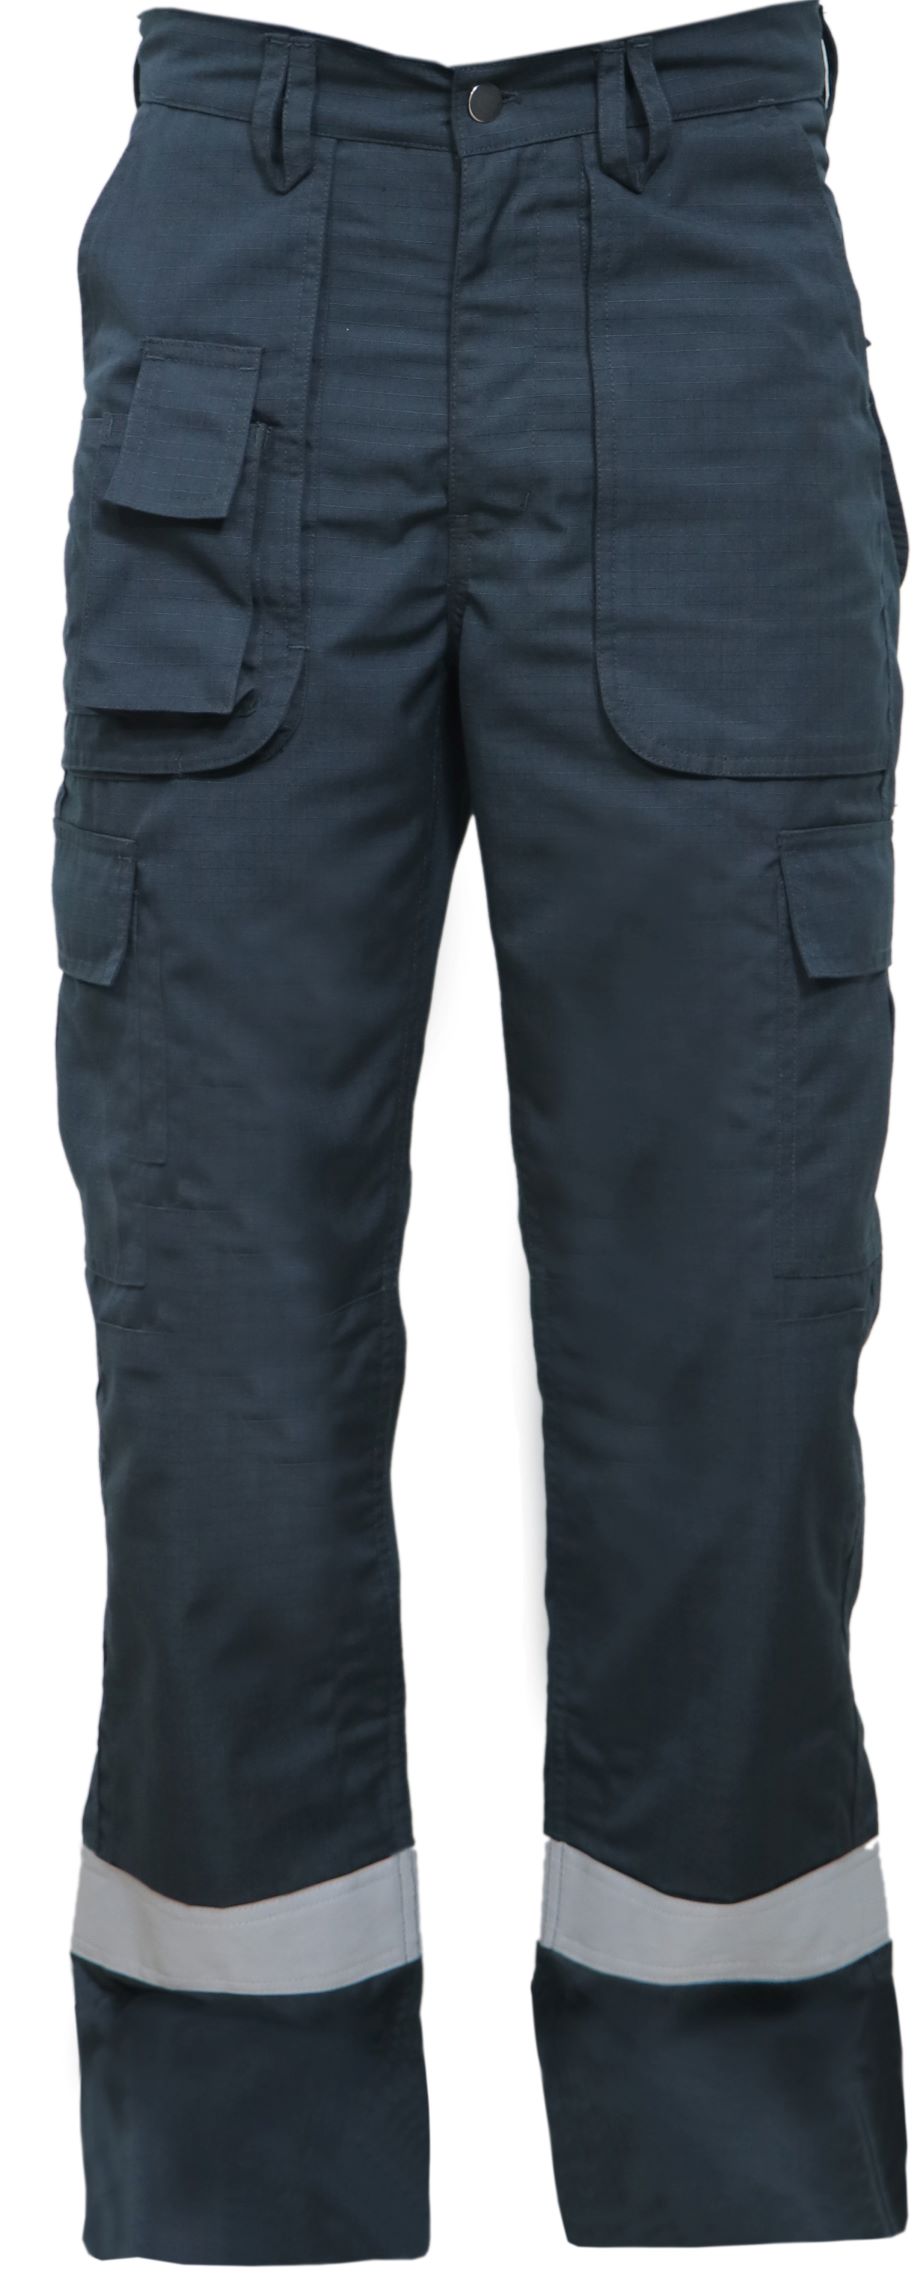 INHERENT FR 625 TROUSERS